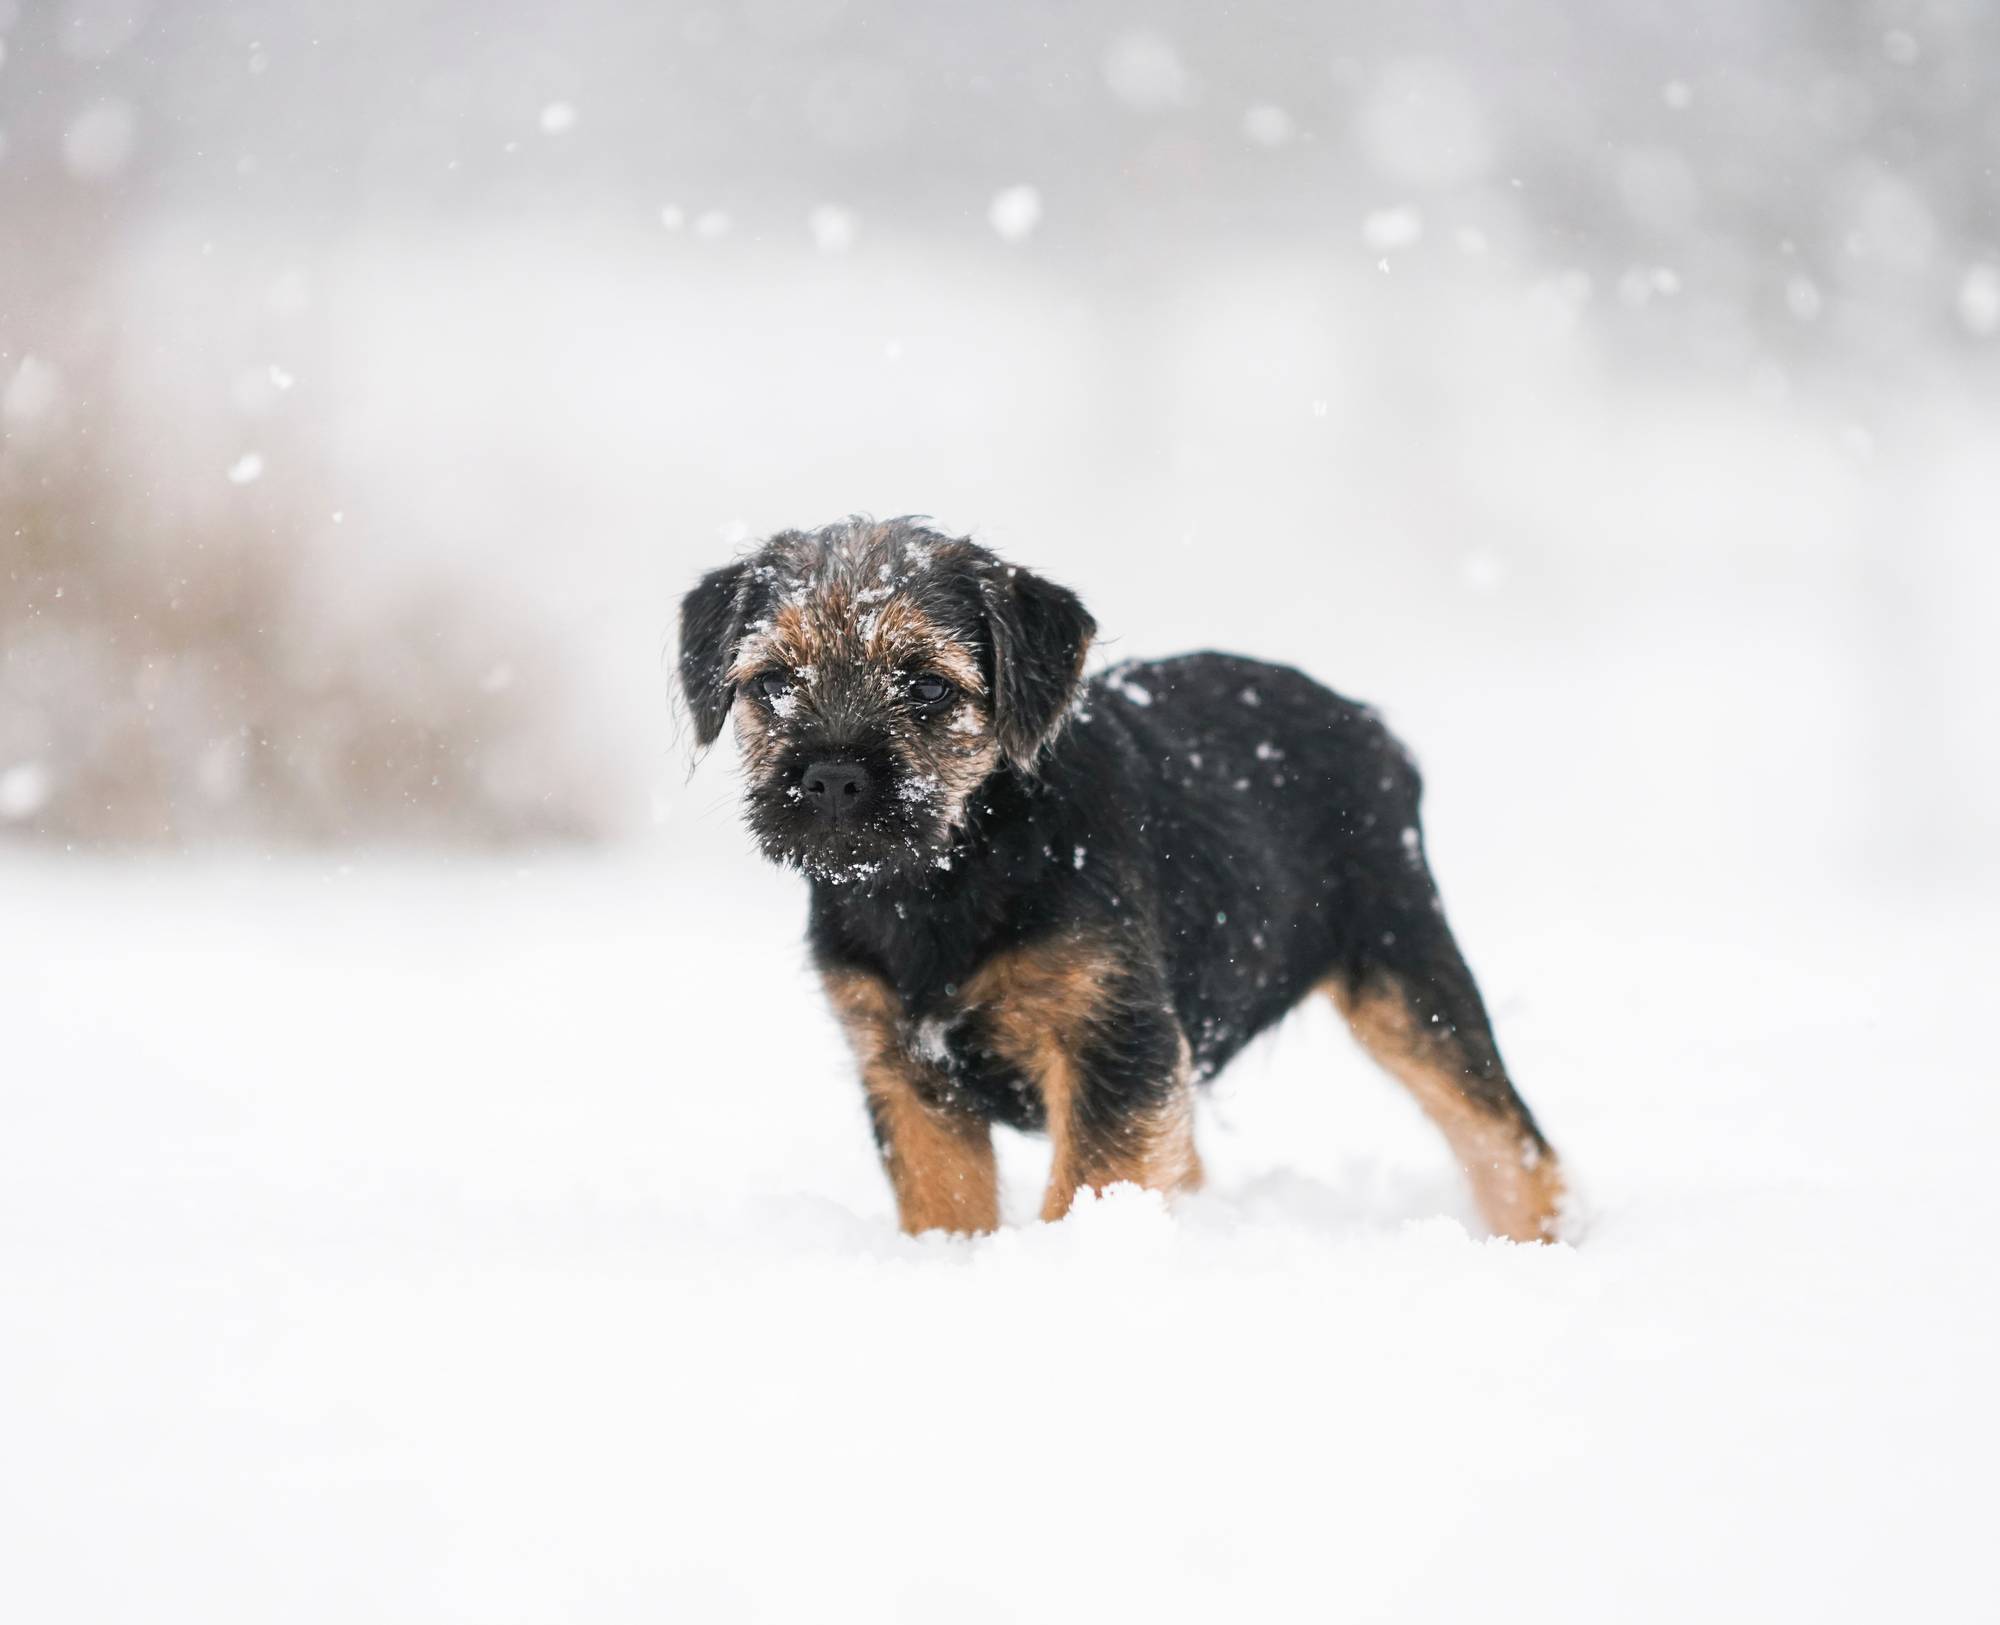 Snow: not so dogfriendly